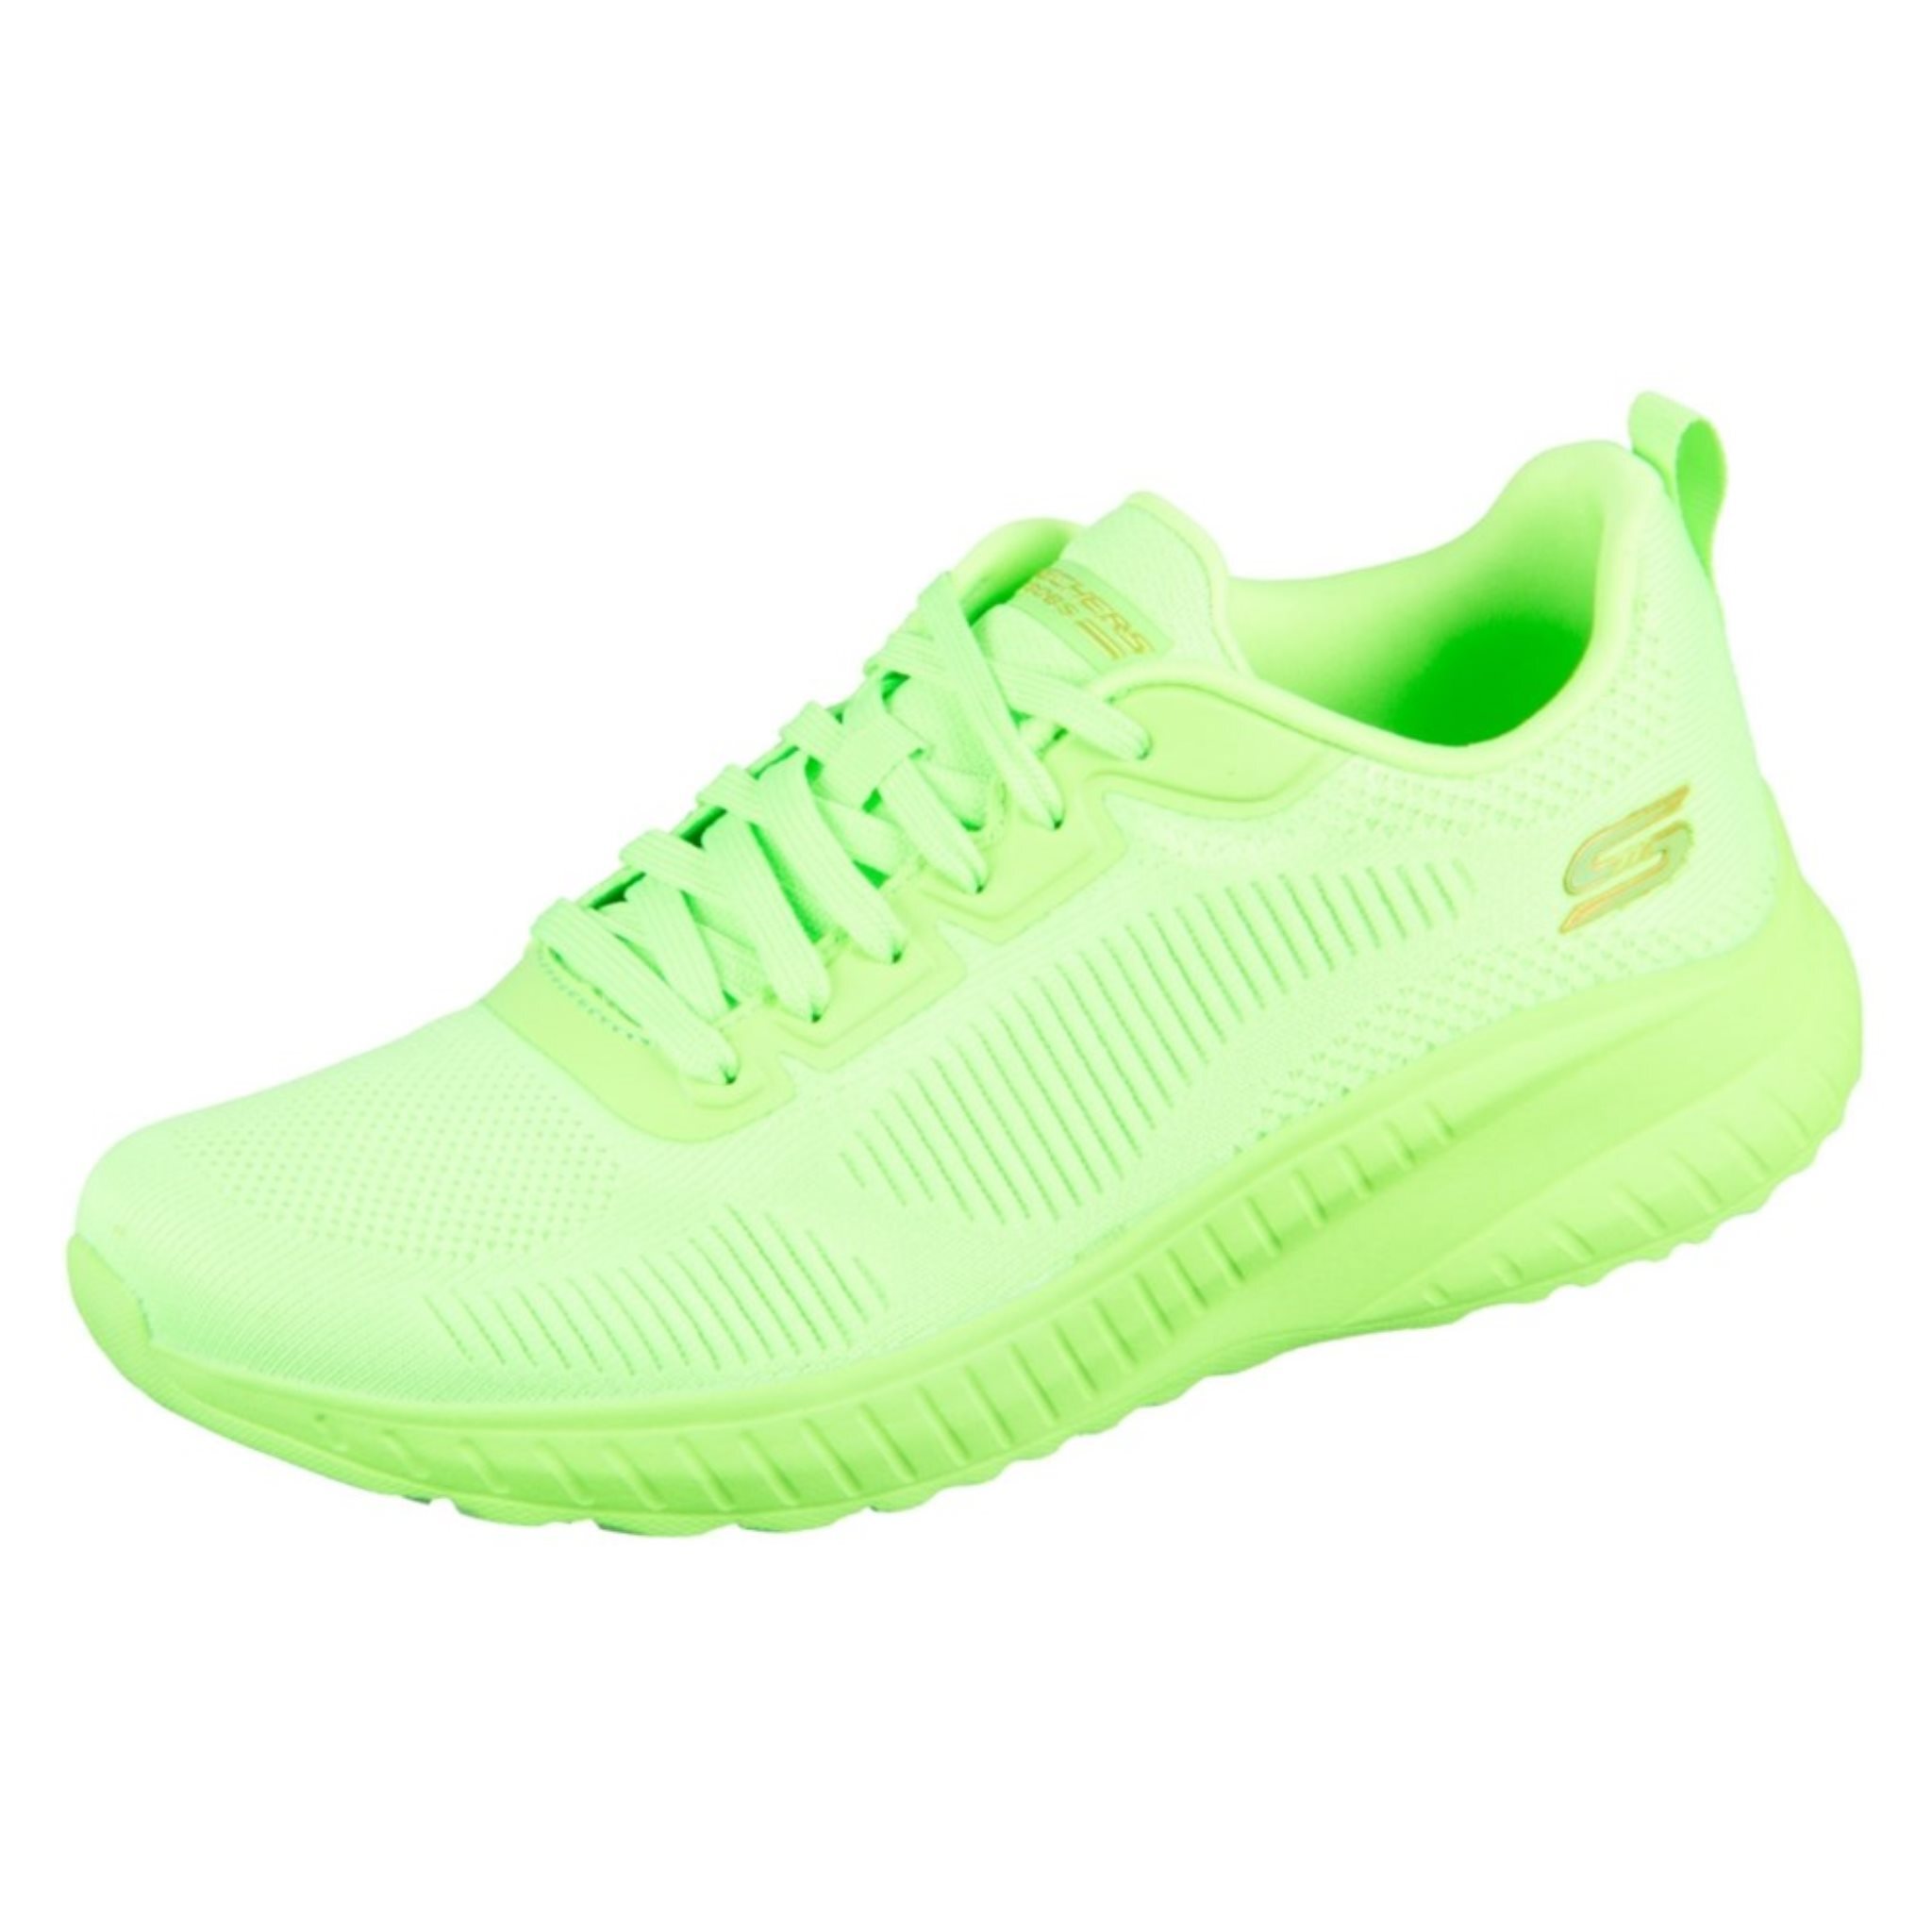 Topánky Skechers 117216Limebobs